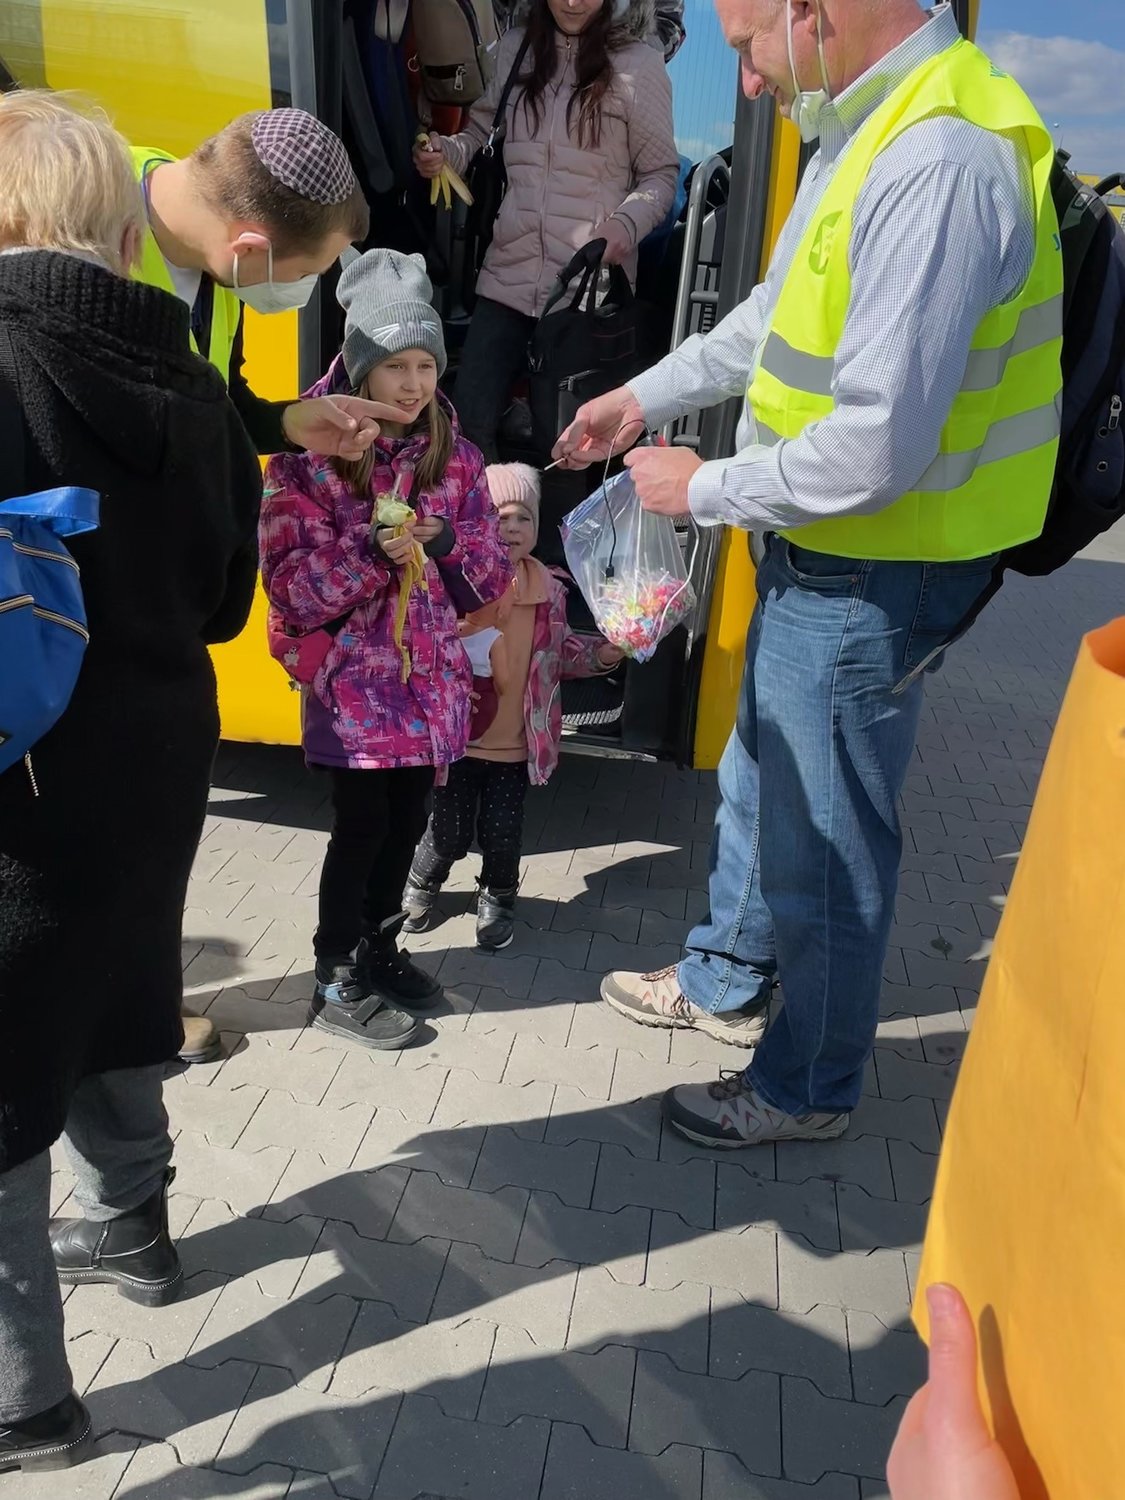 Rabbi Ari Goldstein offered a lollipop to a Ukrainian child arriving at the border town of Przemysl, Poland. Through an interpreter, they were able to assure children that they were trying to help and not harm.